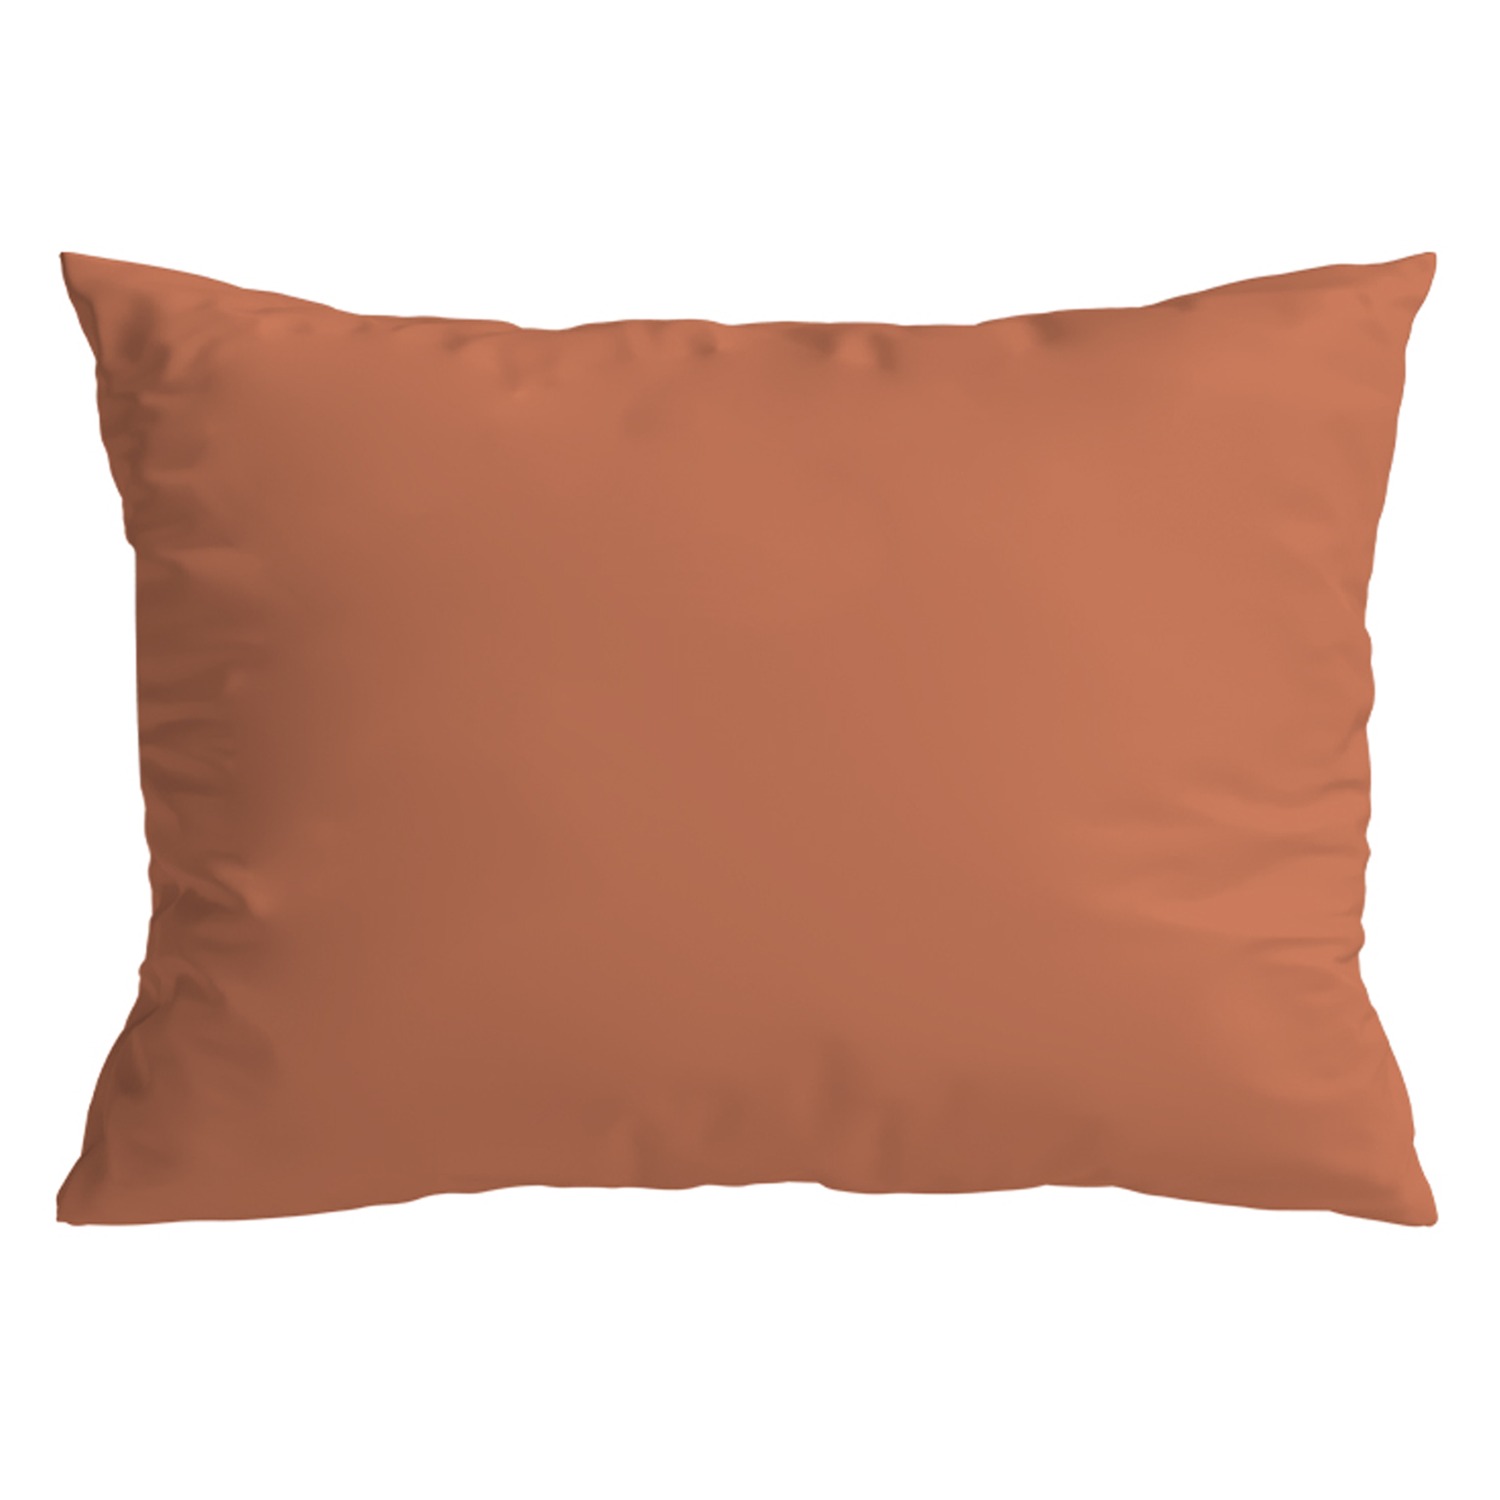 [a.o.b] another rust pillow cover